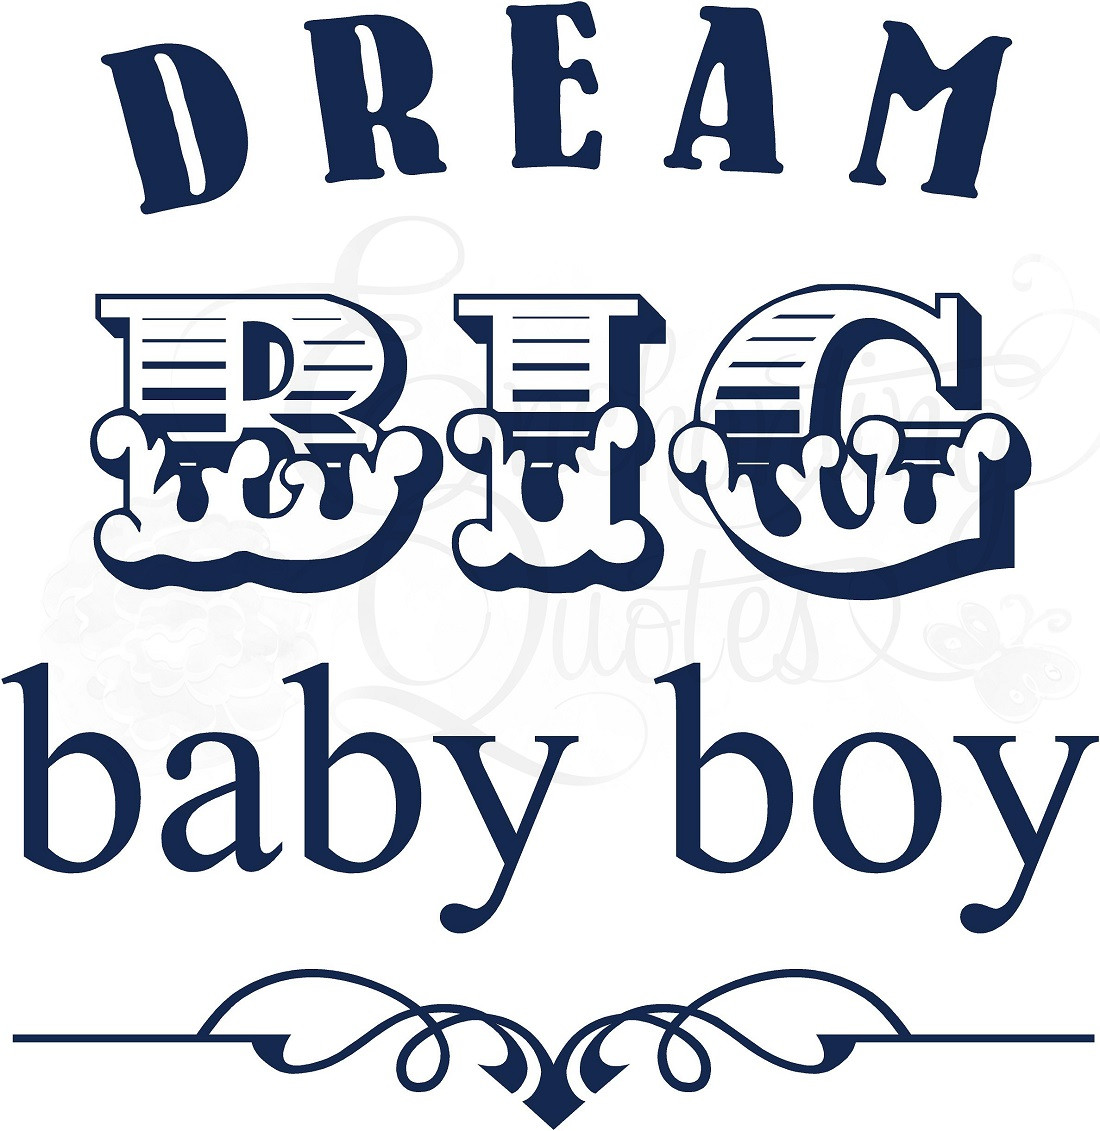 Baby Boy Quote
 Baby Boy Quotes And Sayings QuotesGram